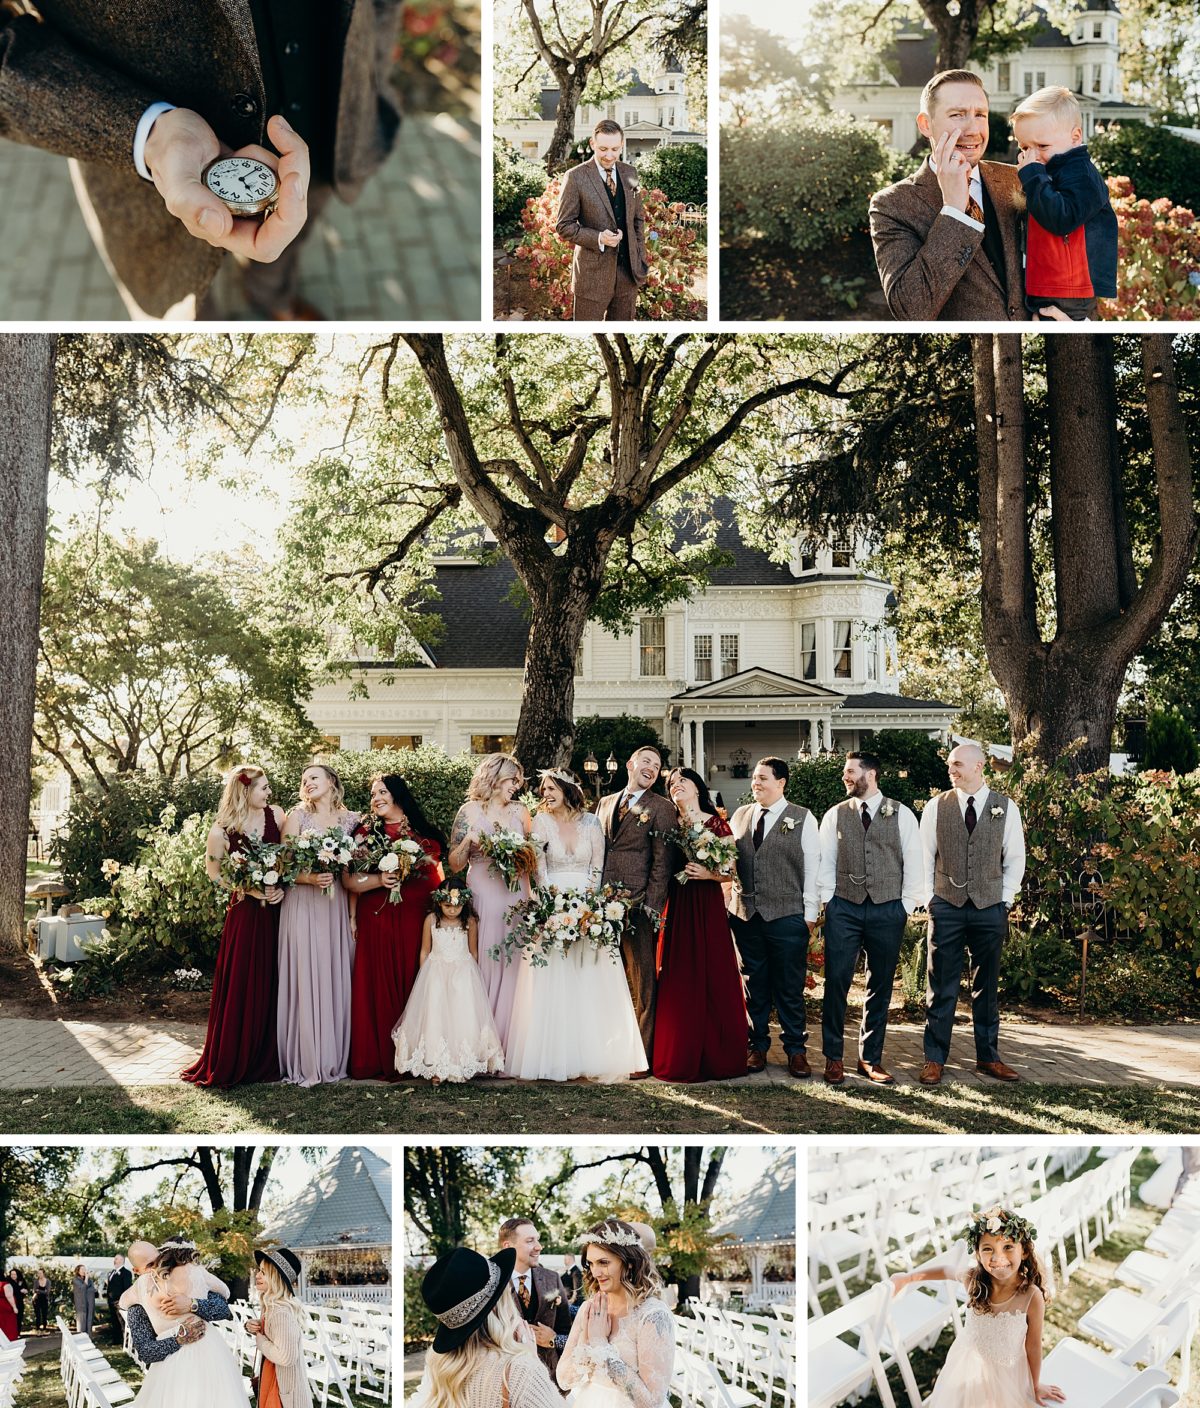 Wedding party candids at this Victorian Belle wedding in Portland, Oregon.